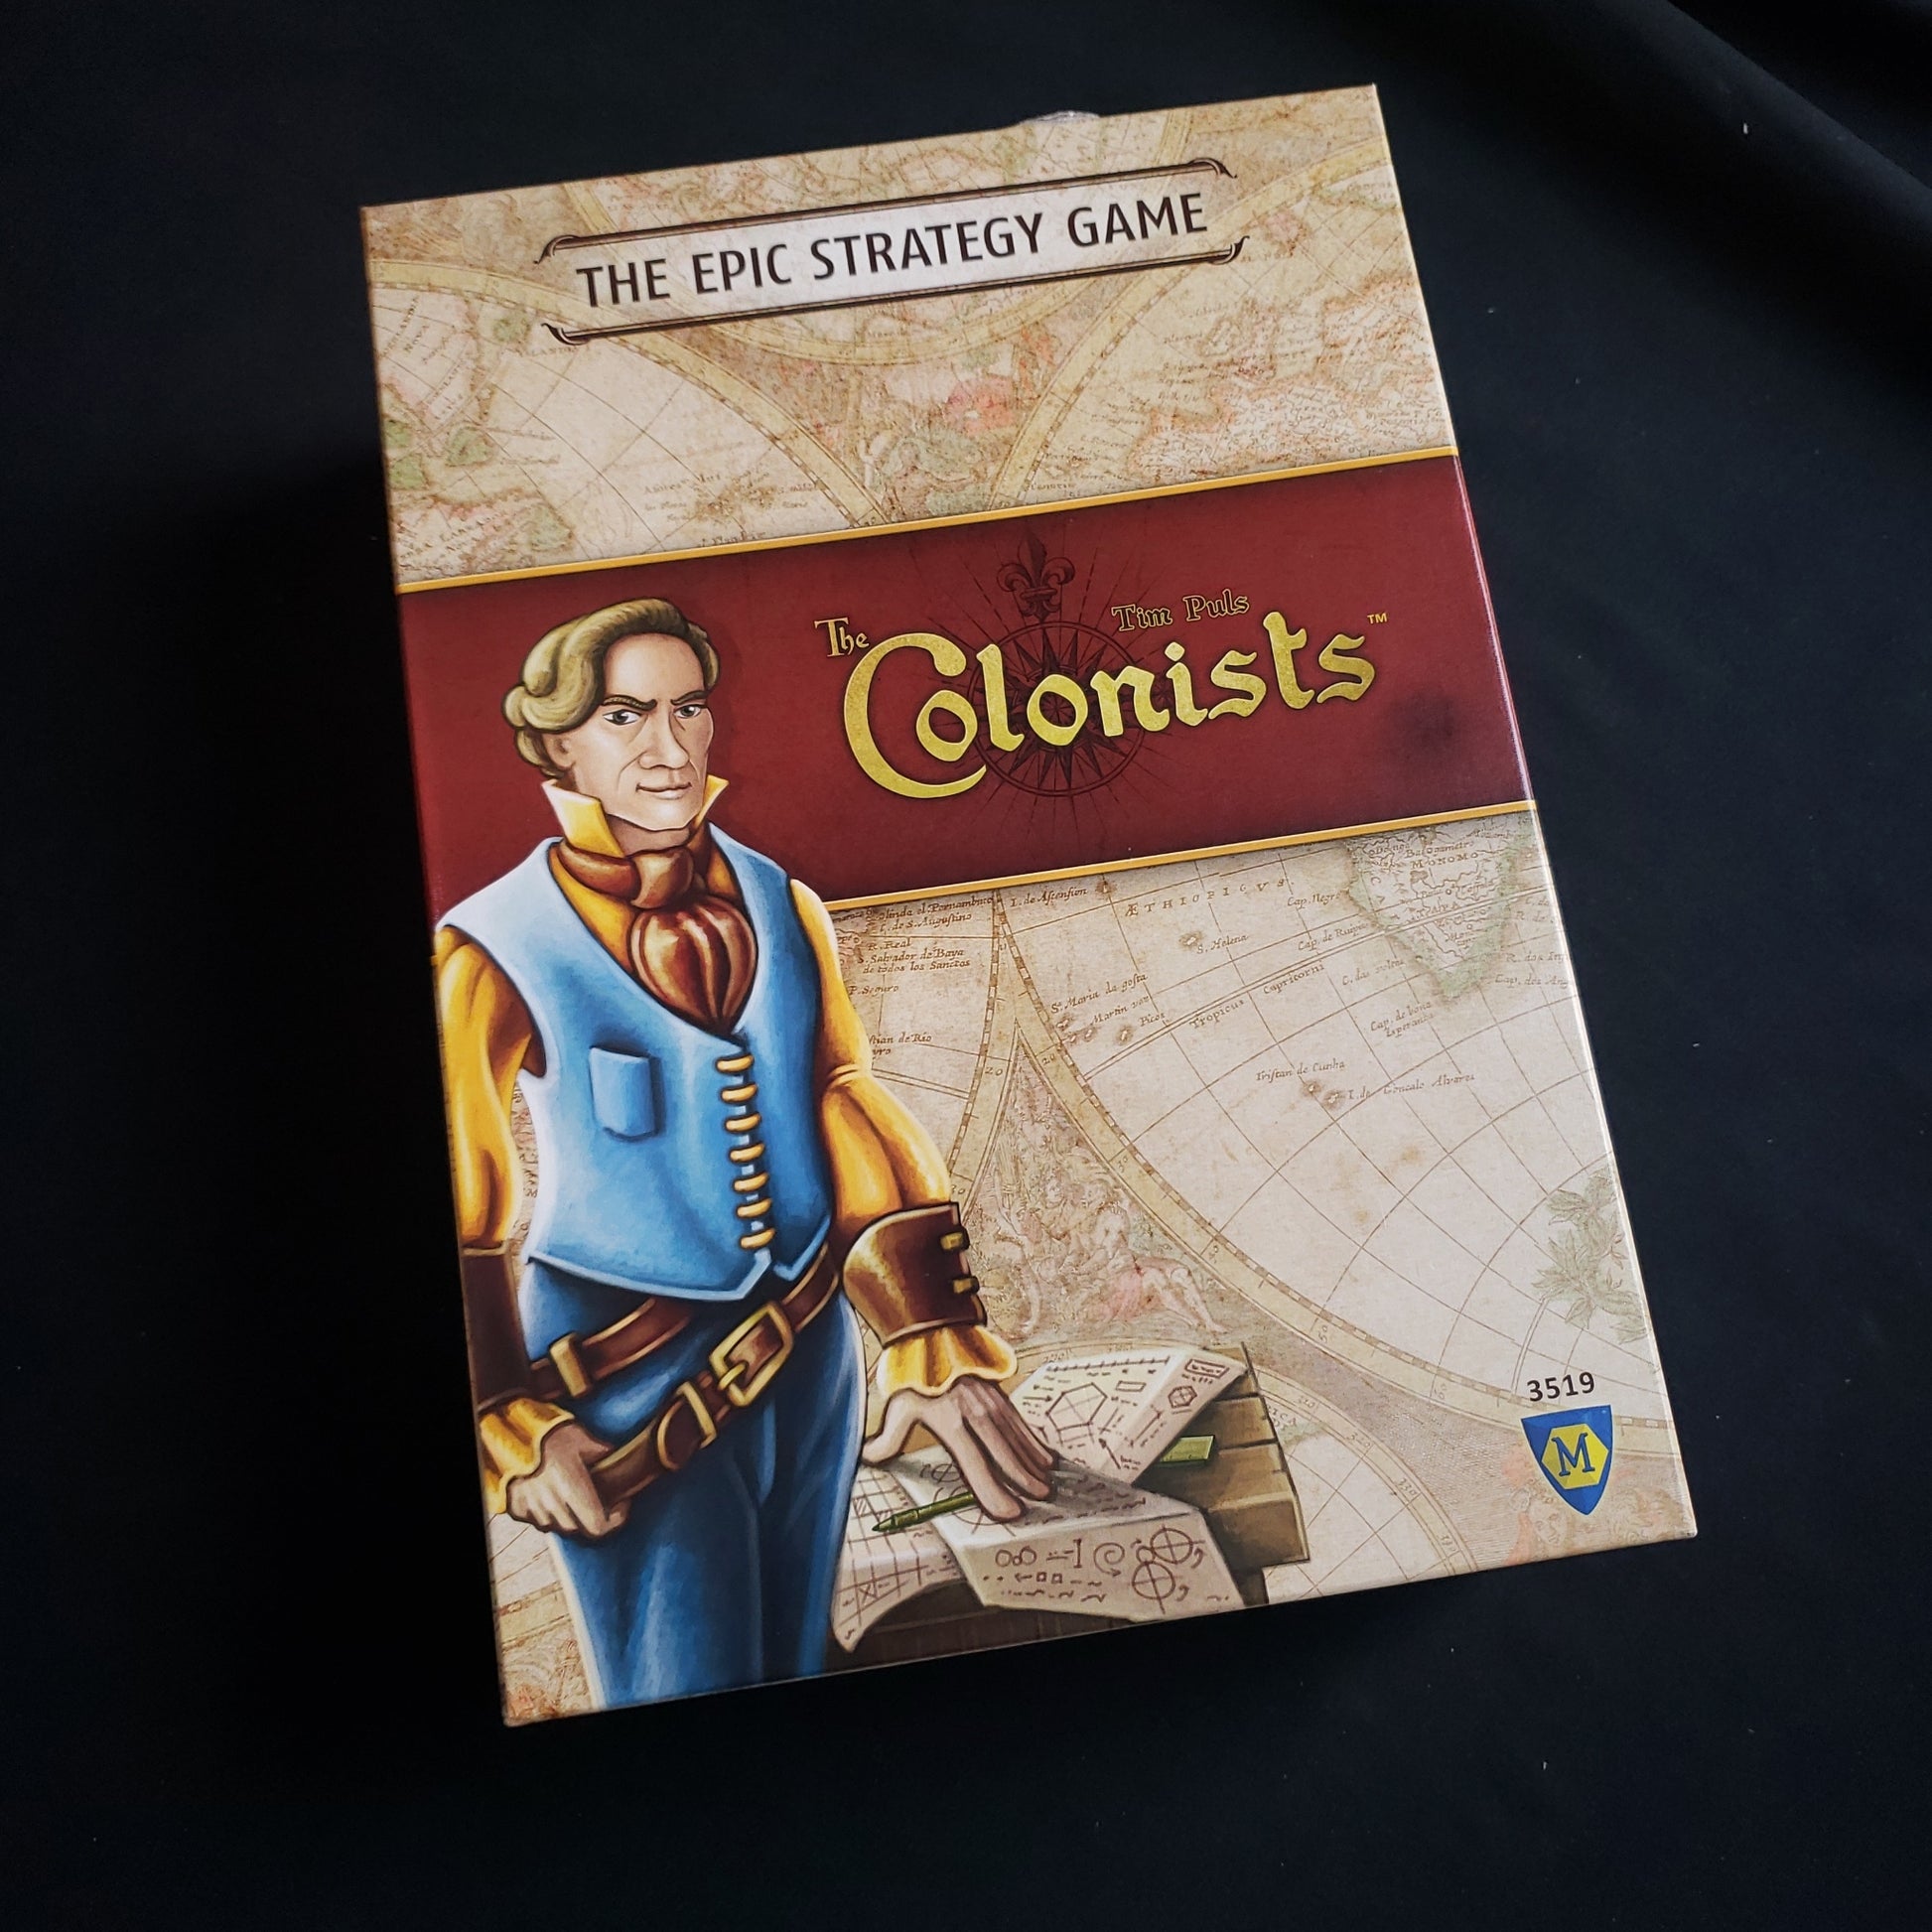 Image shows the front cover of the box of the Colonists board game